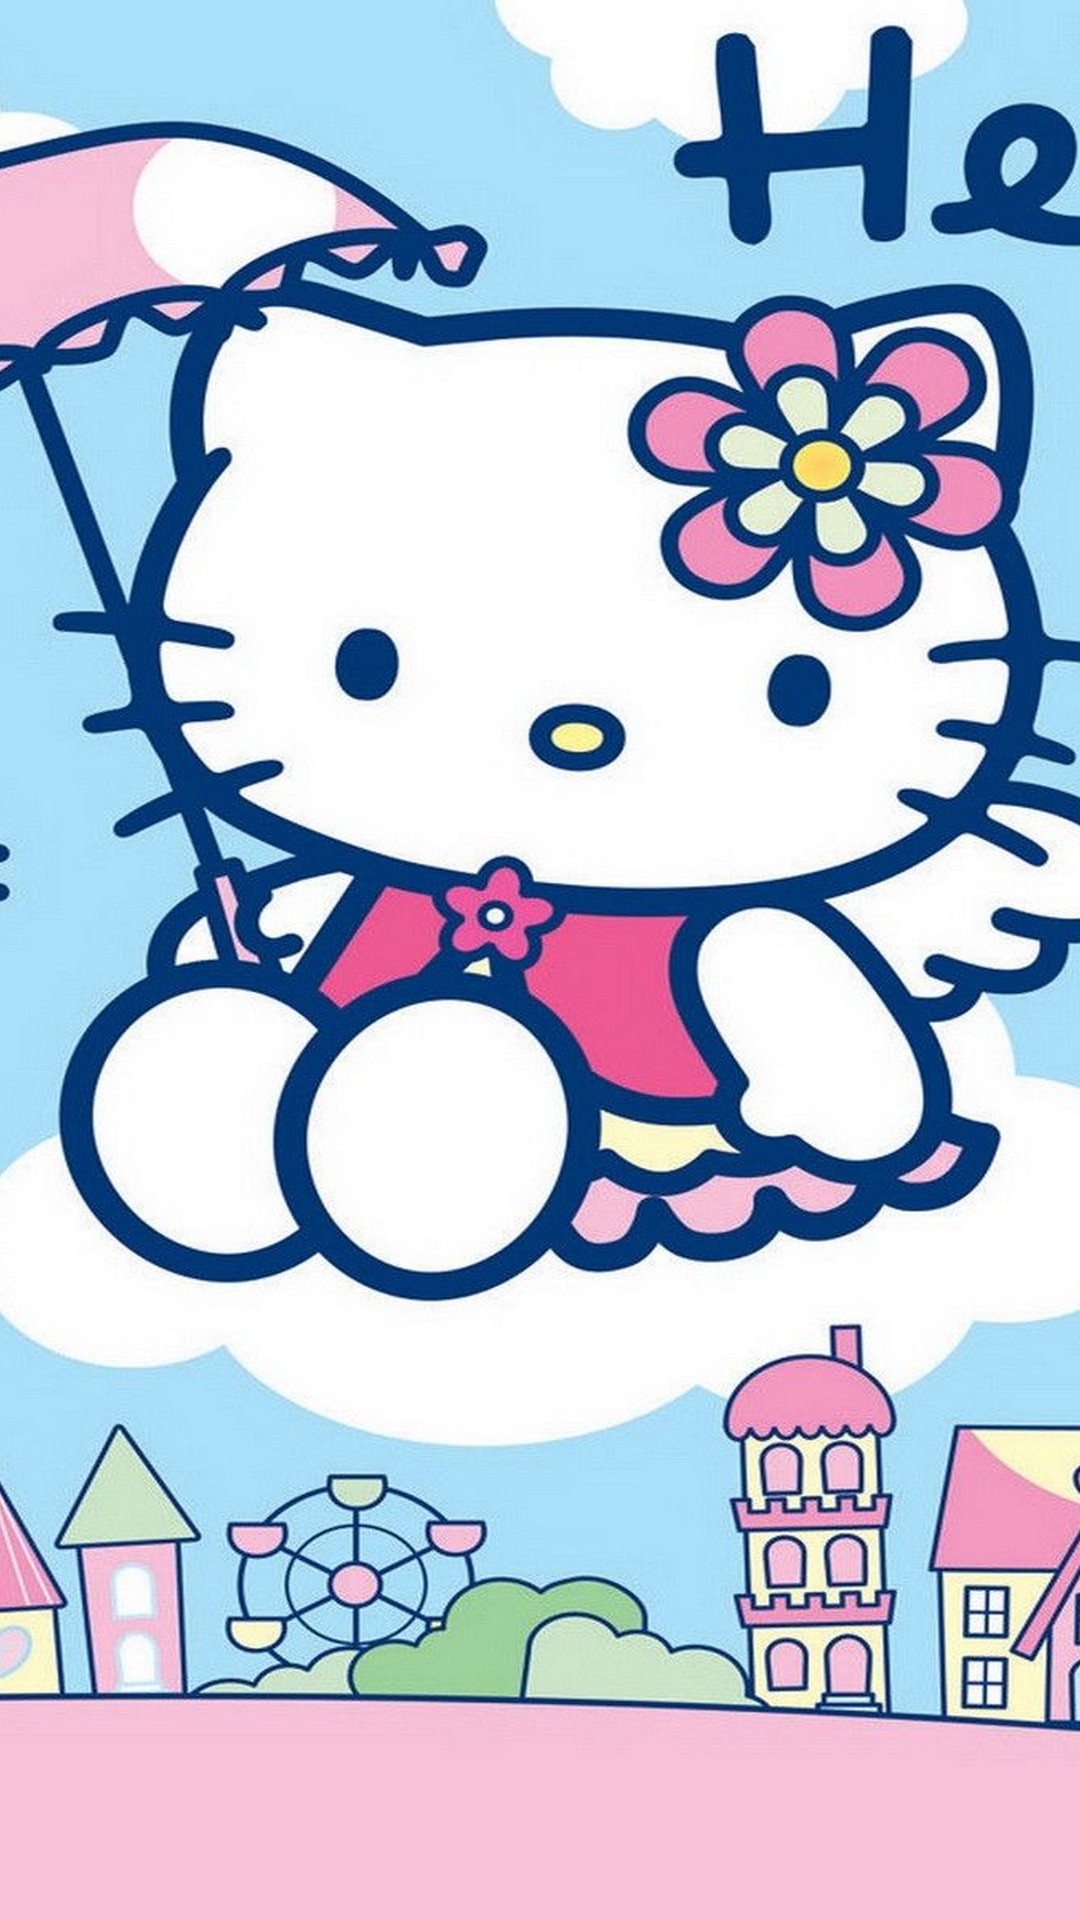 Kitty Wallpaper For iPhone with resolution 1080X1920 pixel. You can make this wallpaper for your iPhone 5, 6, 7, 8, X backgrounds, Mobile Screensaver, or iPad Lock Screen